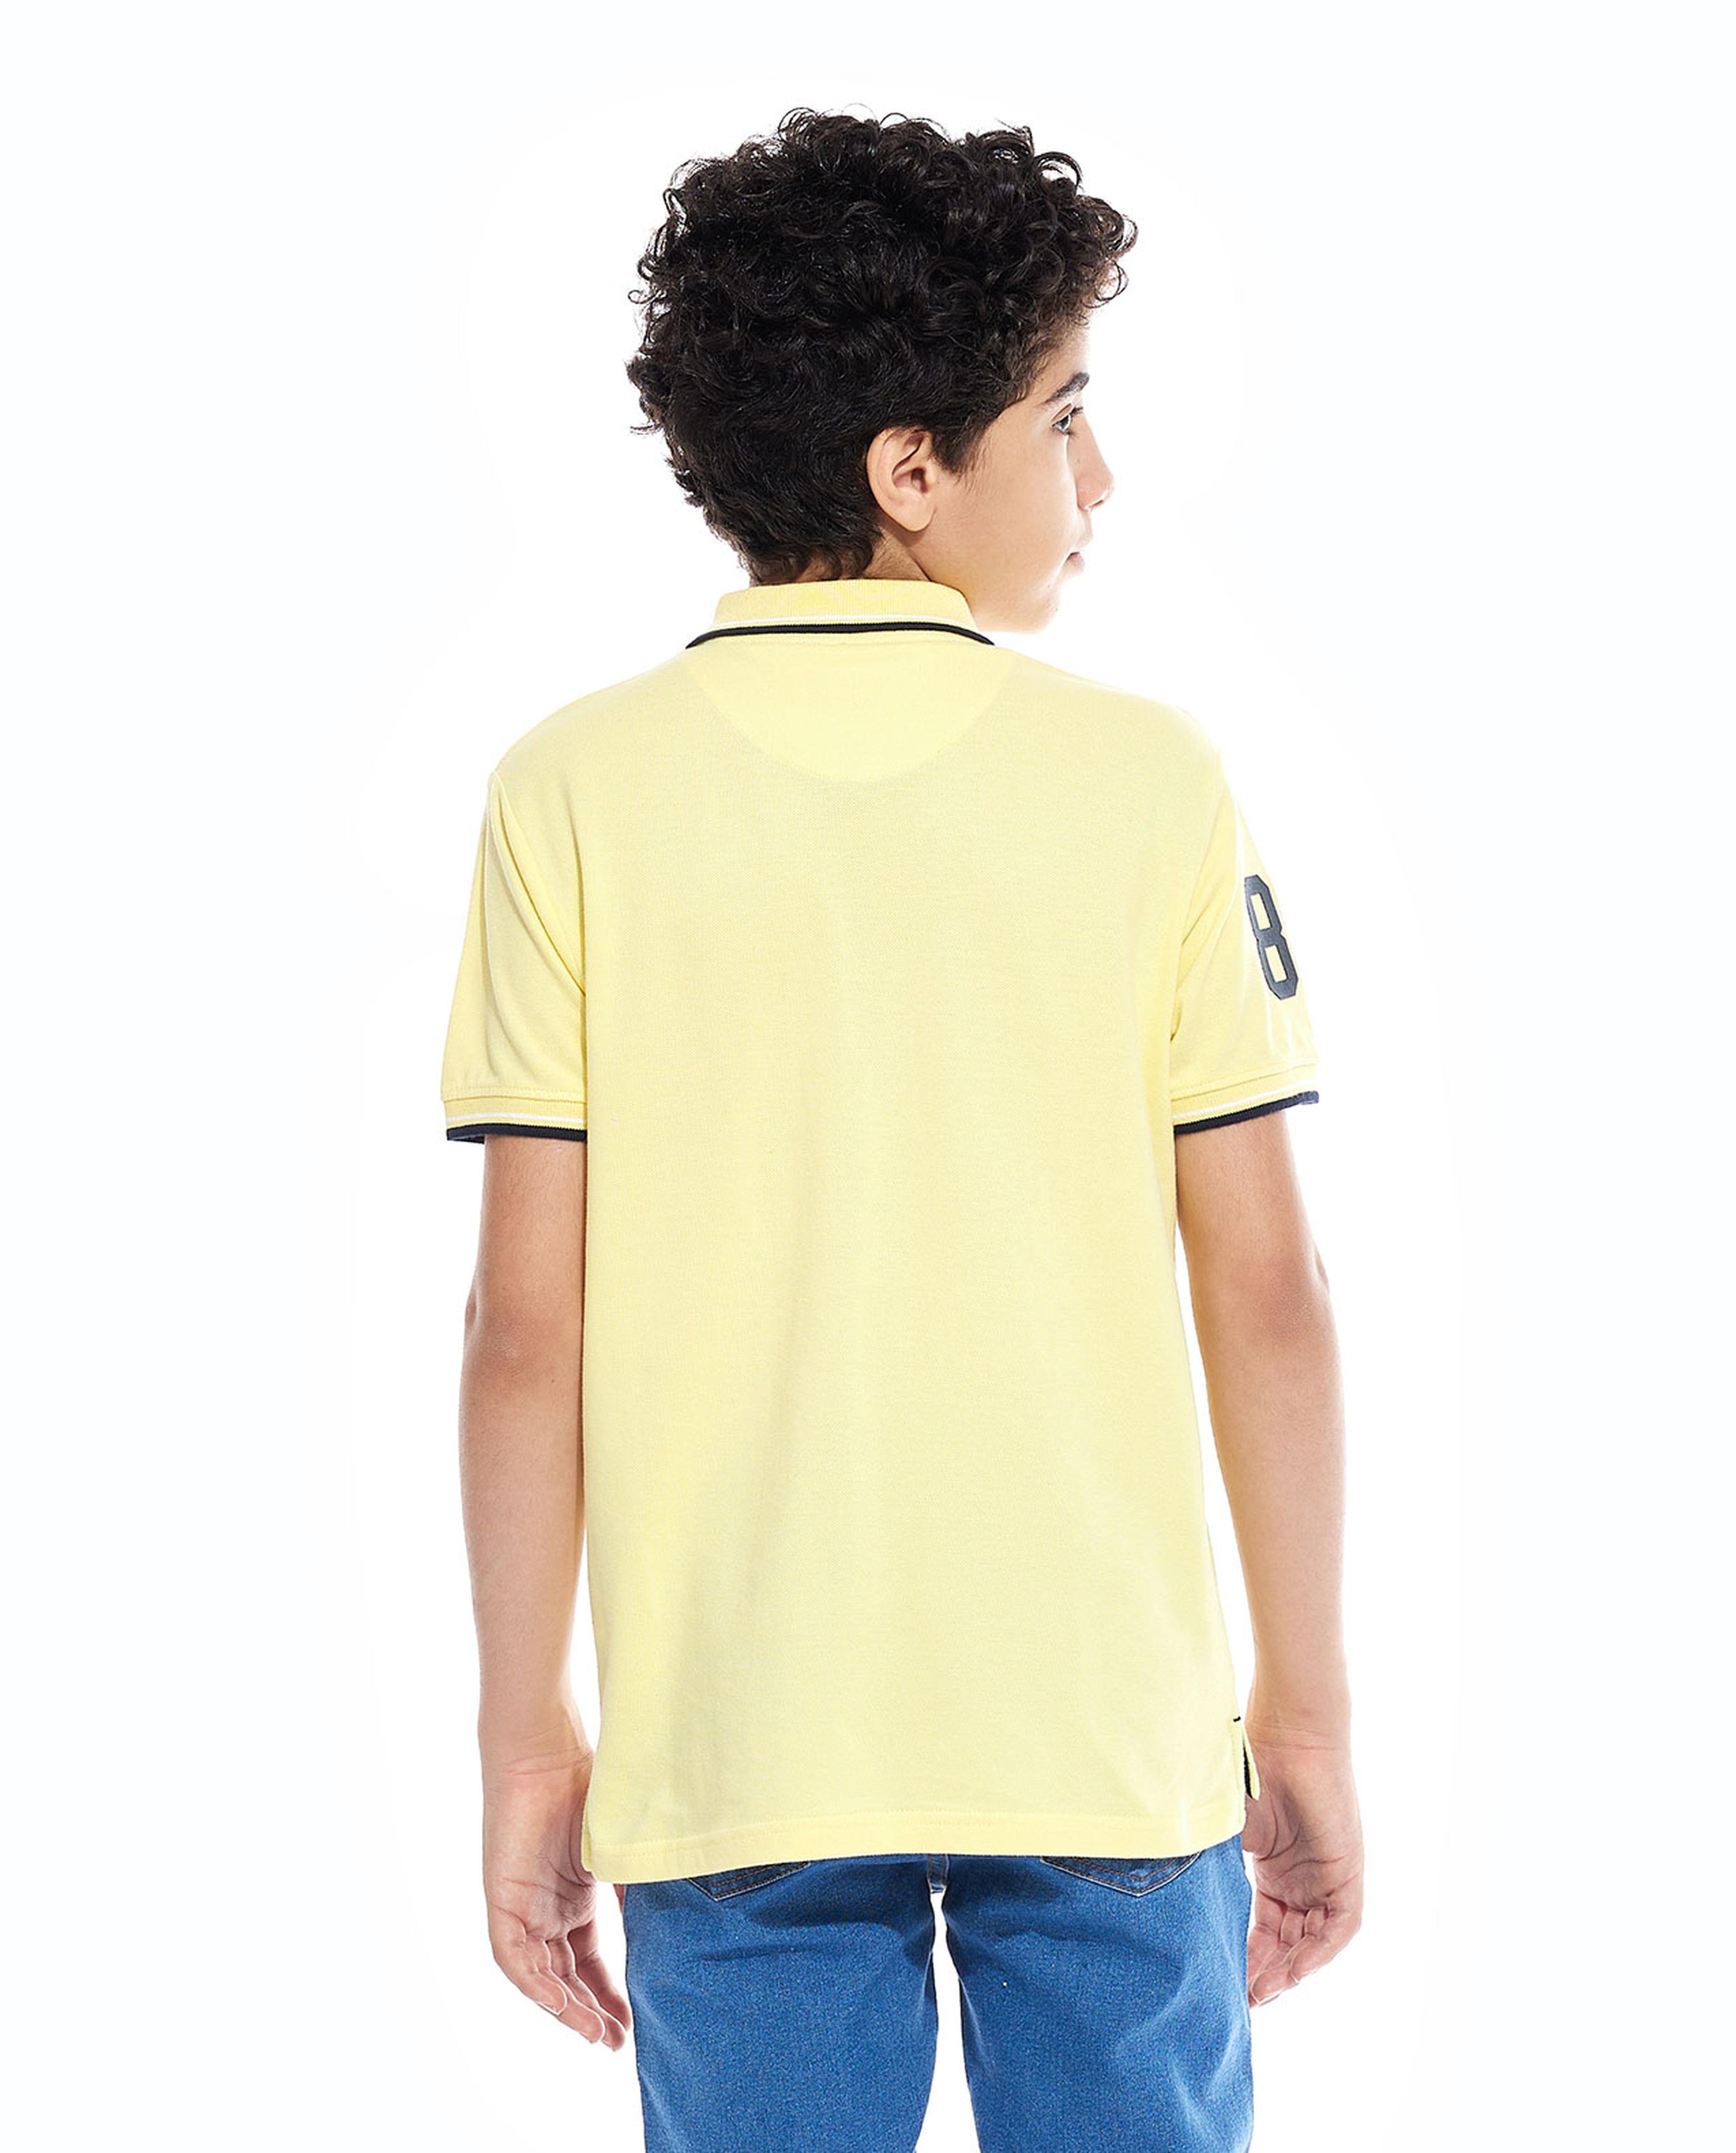 Print Detail Polo T-Shirt with Short Sleeves